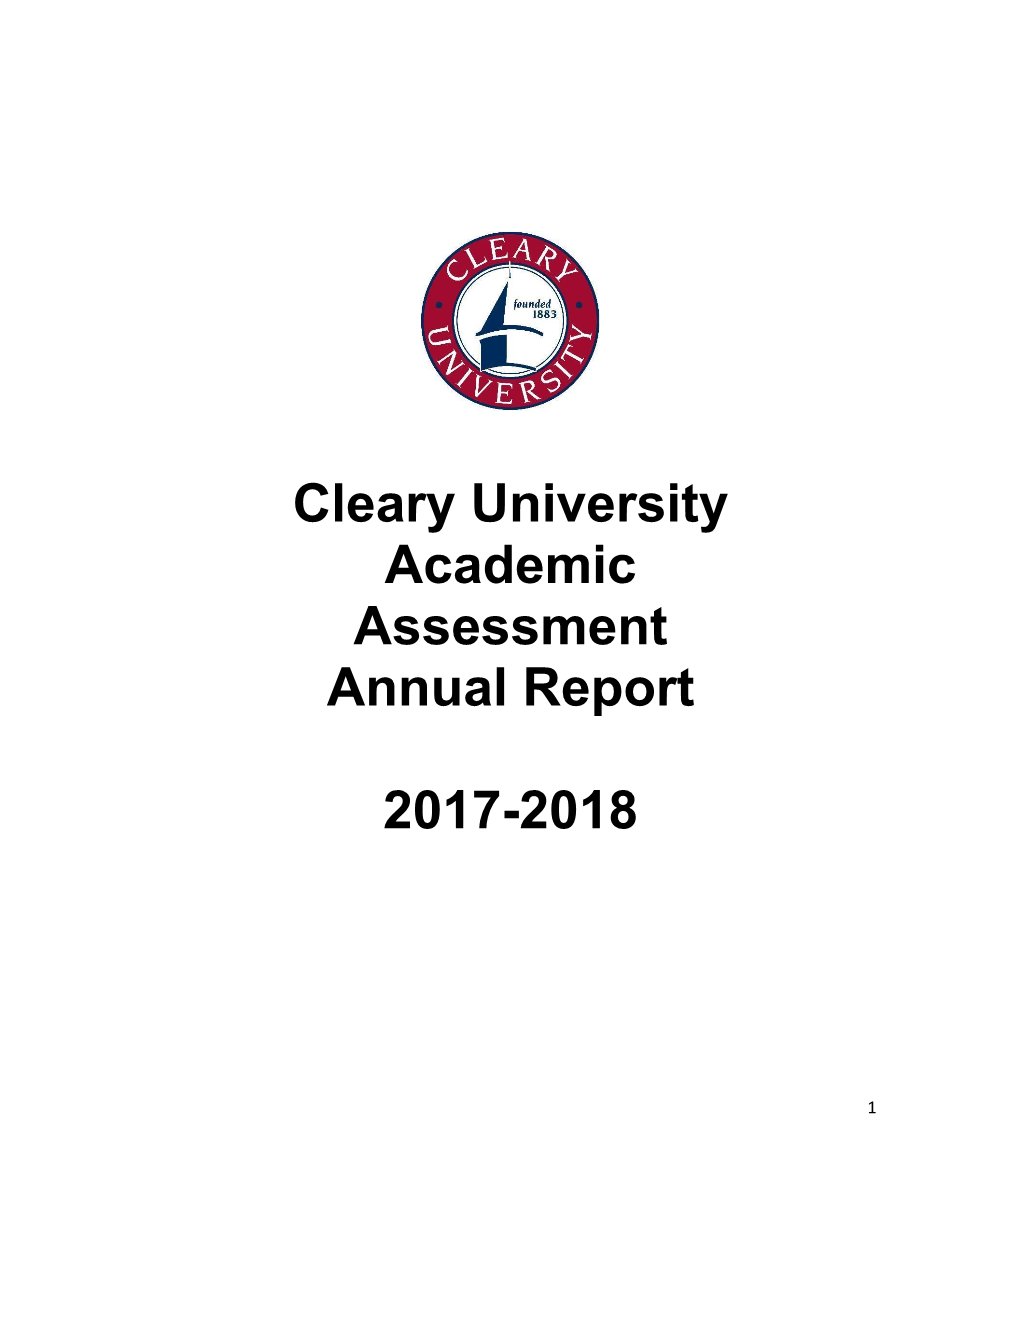 Cleary University Academic Assessment Annual Report 2017